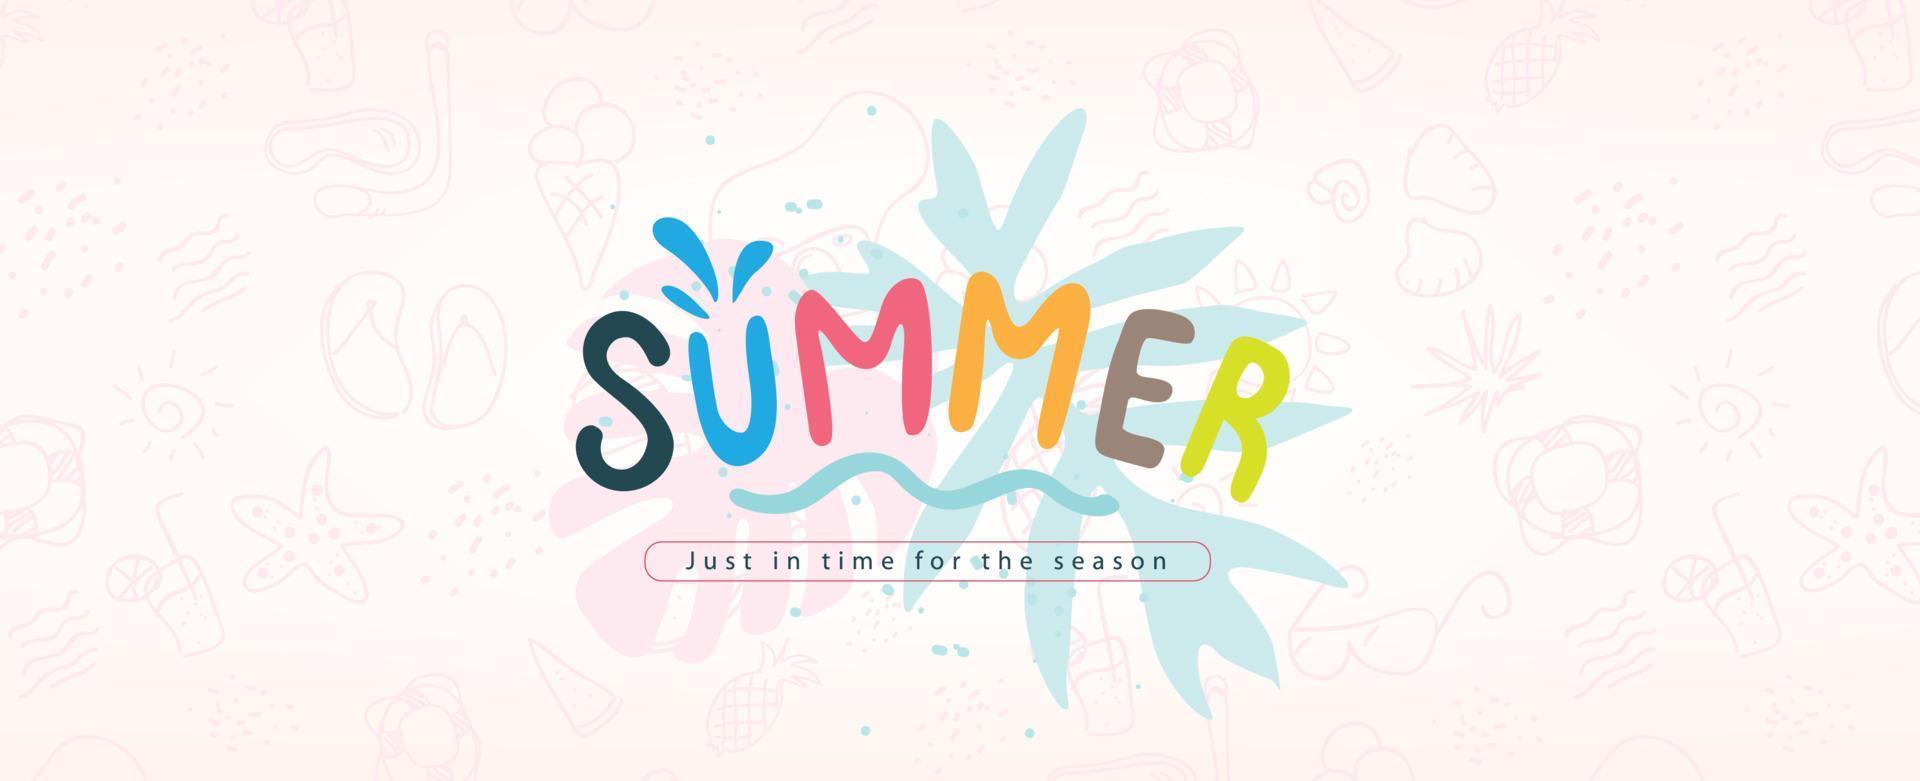 Tropical Colorful Summer beach vibes background layout design vector